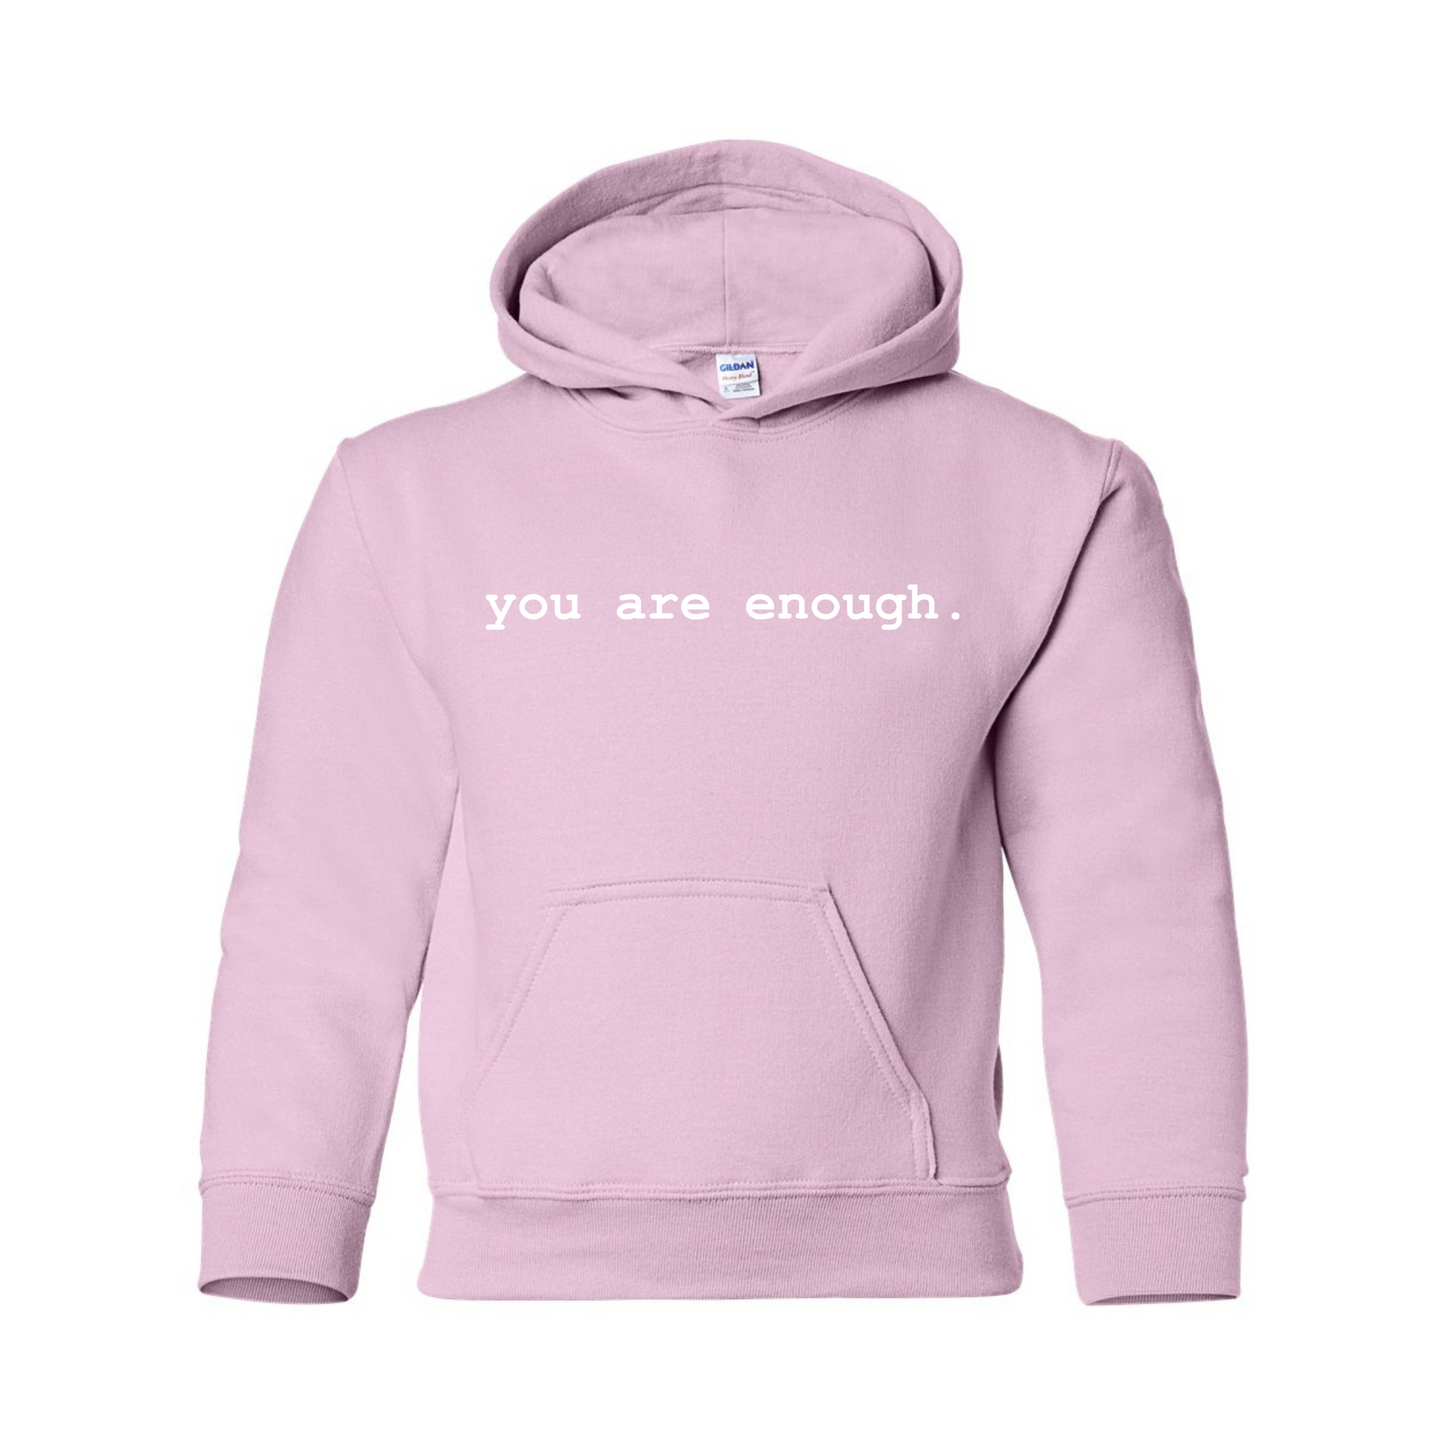 You Are Enough Hoodie - Youth Sizes